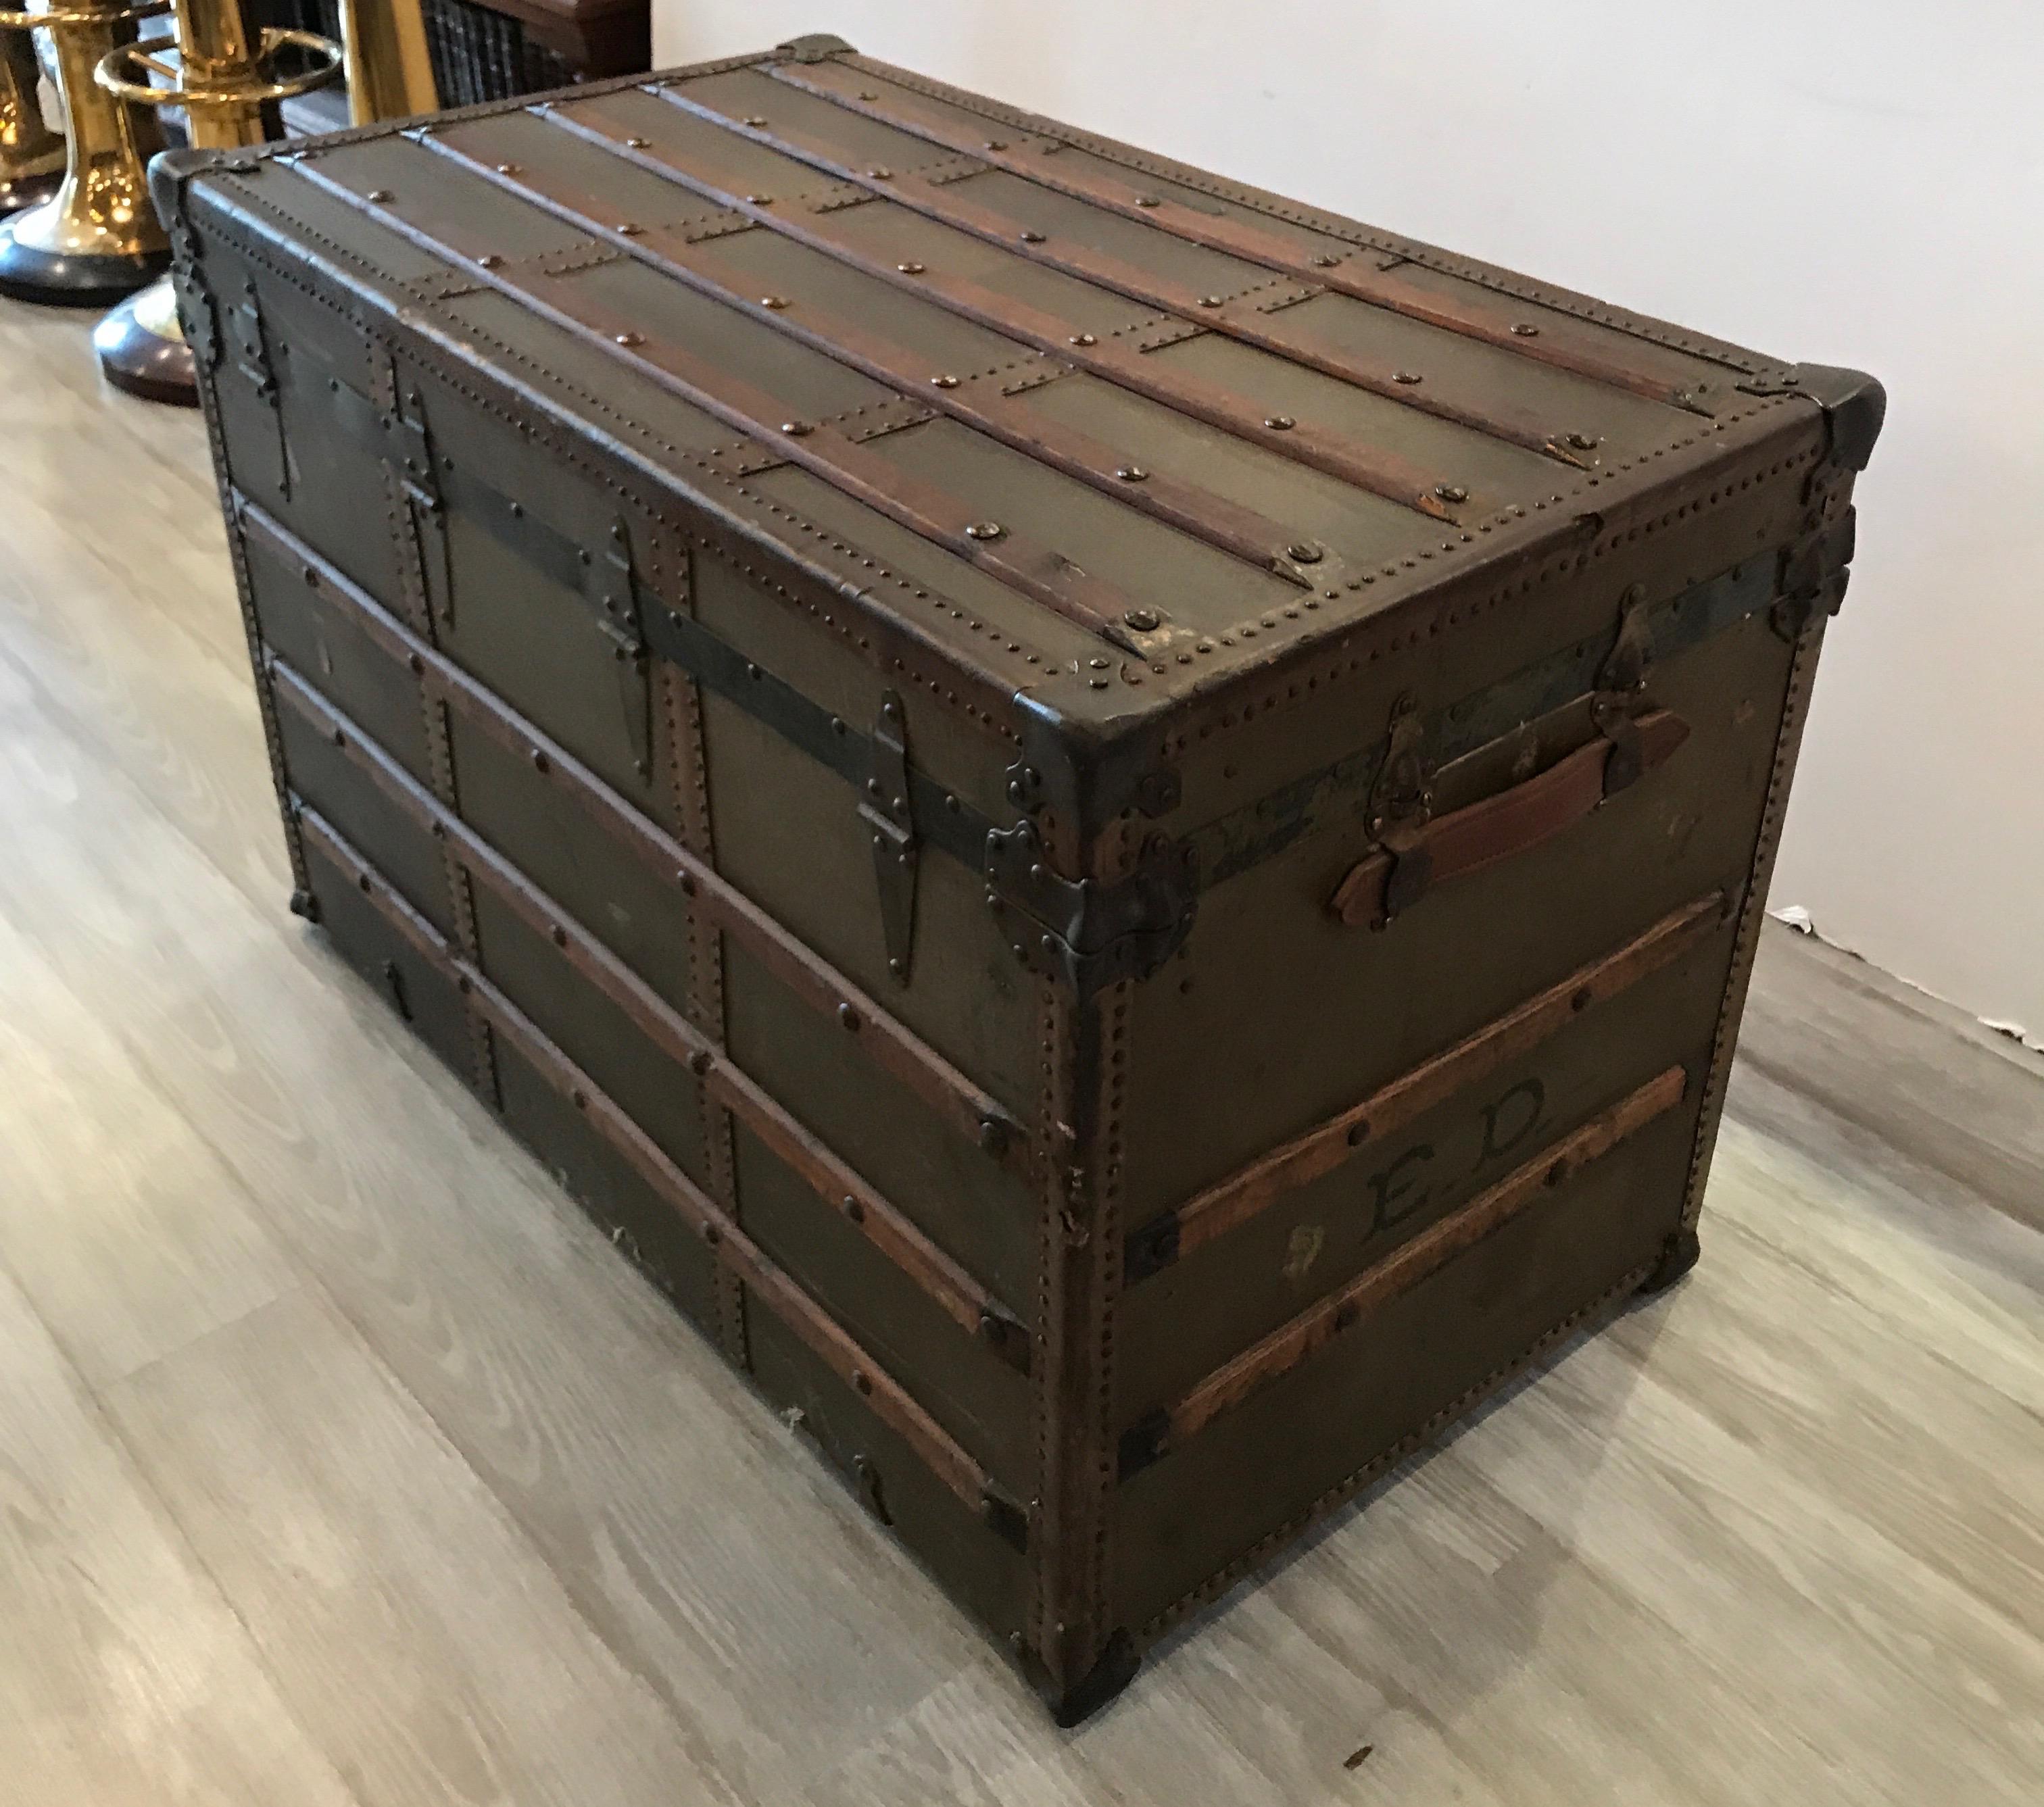 Late Victorian Antique Steamer Trunk with Inside Tray and Compartments, circa 1890